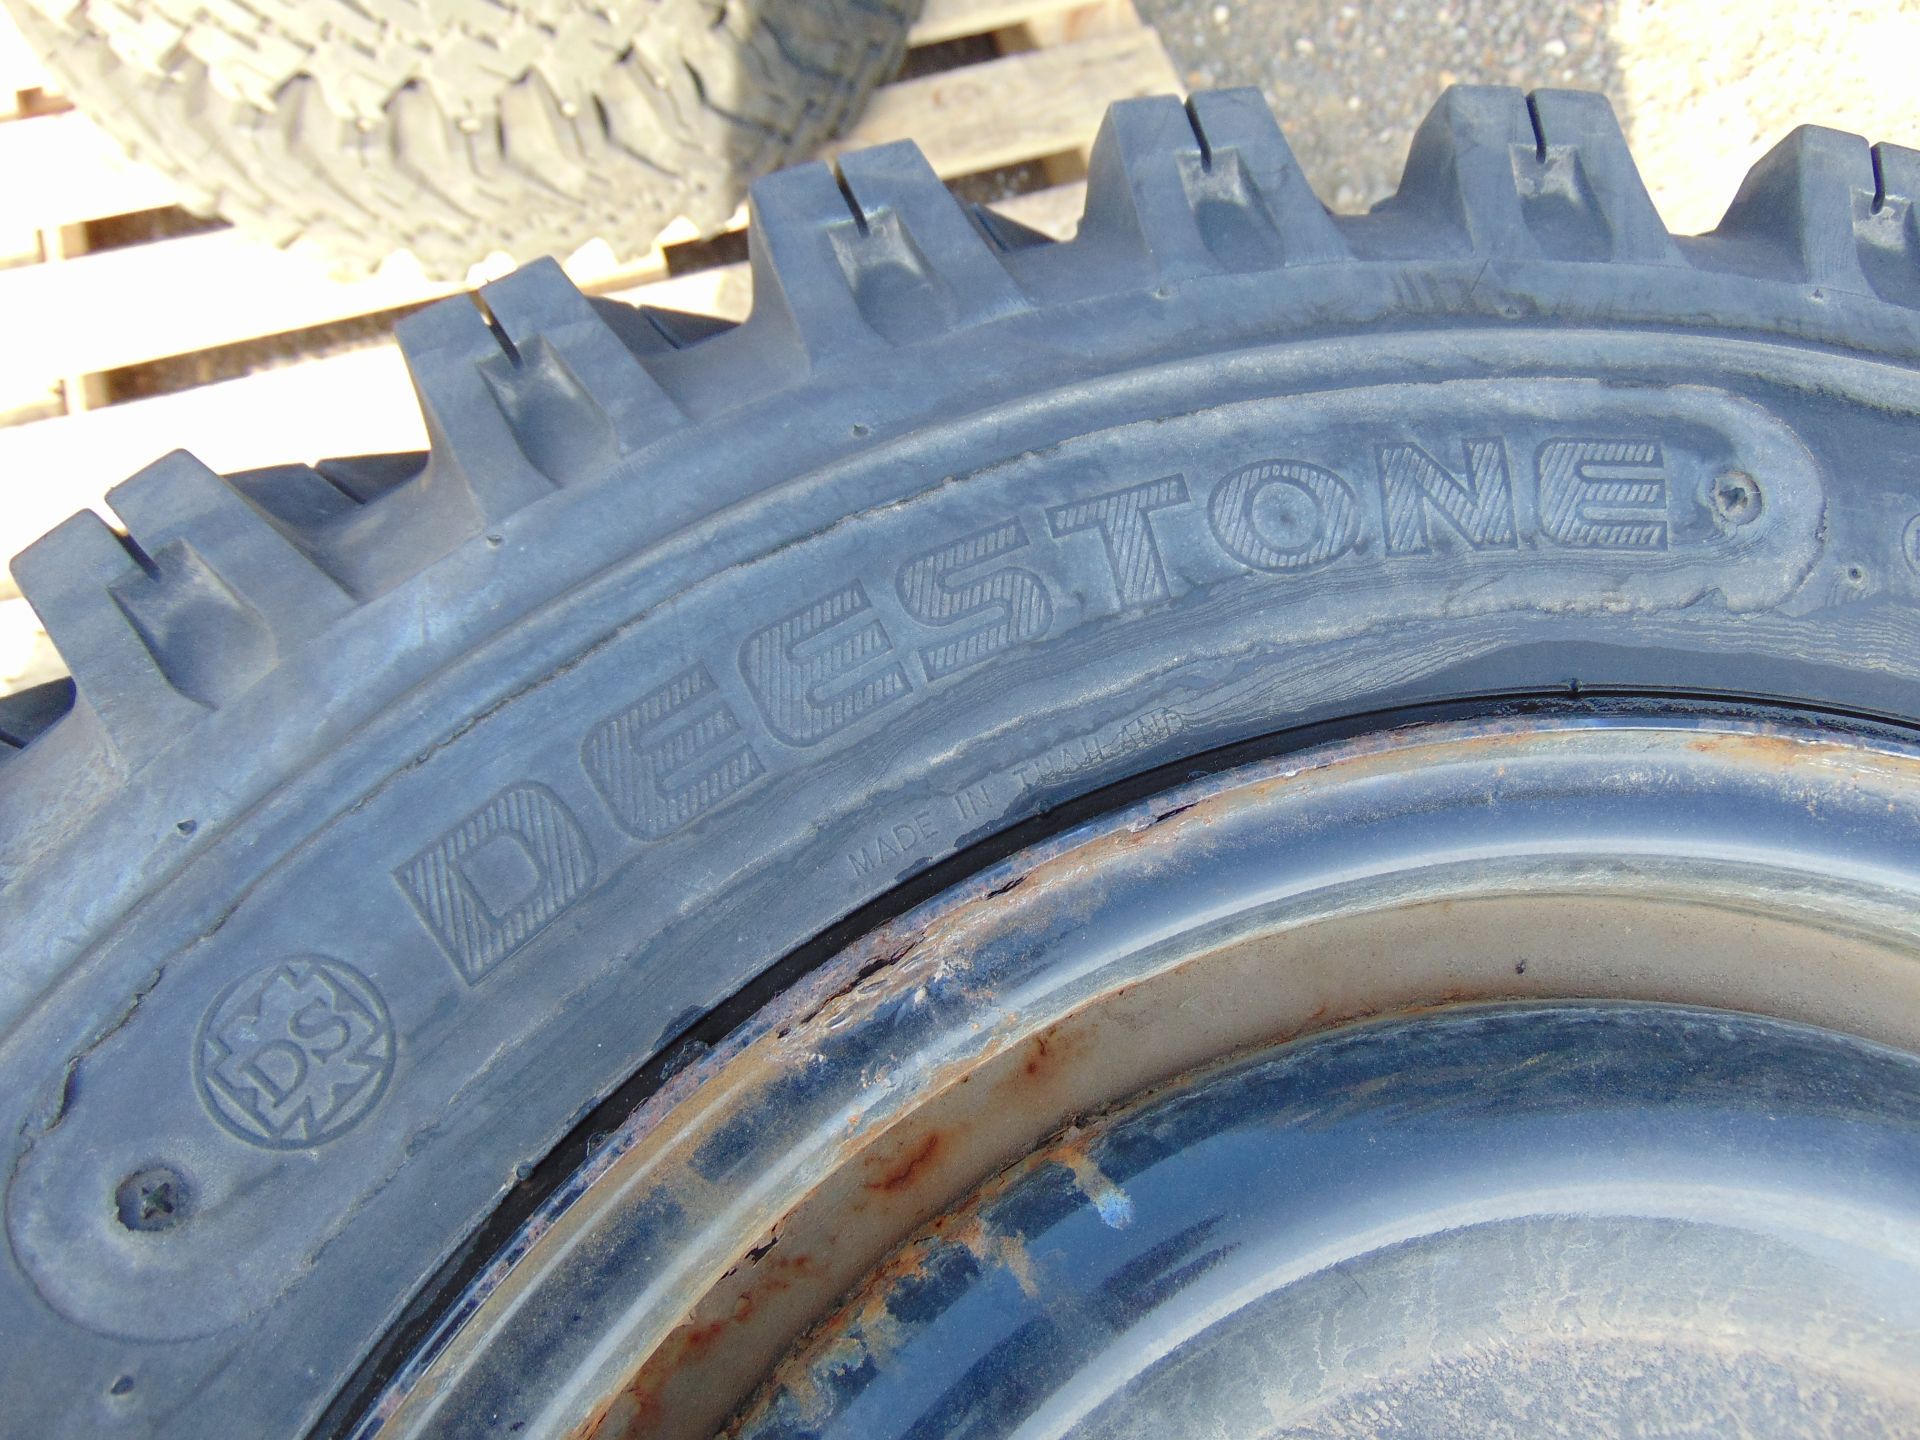 4 x Deestone Extra Traction 6.00-16 Tyres with 5 Stud Rims - Image 4 of 7